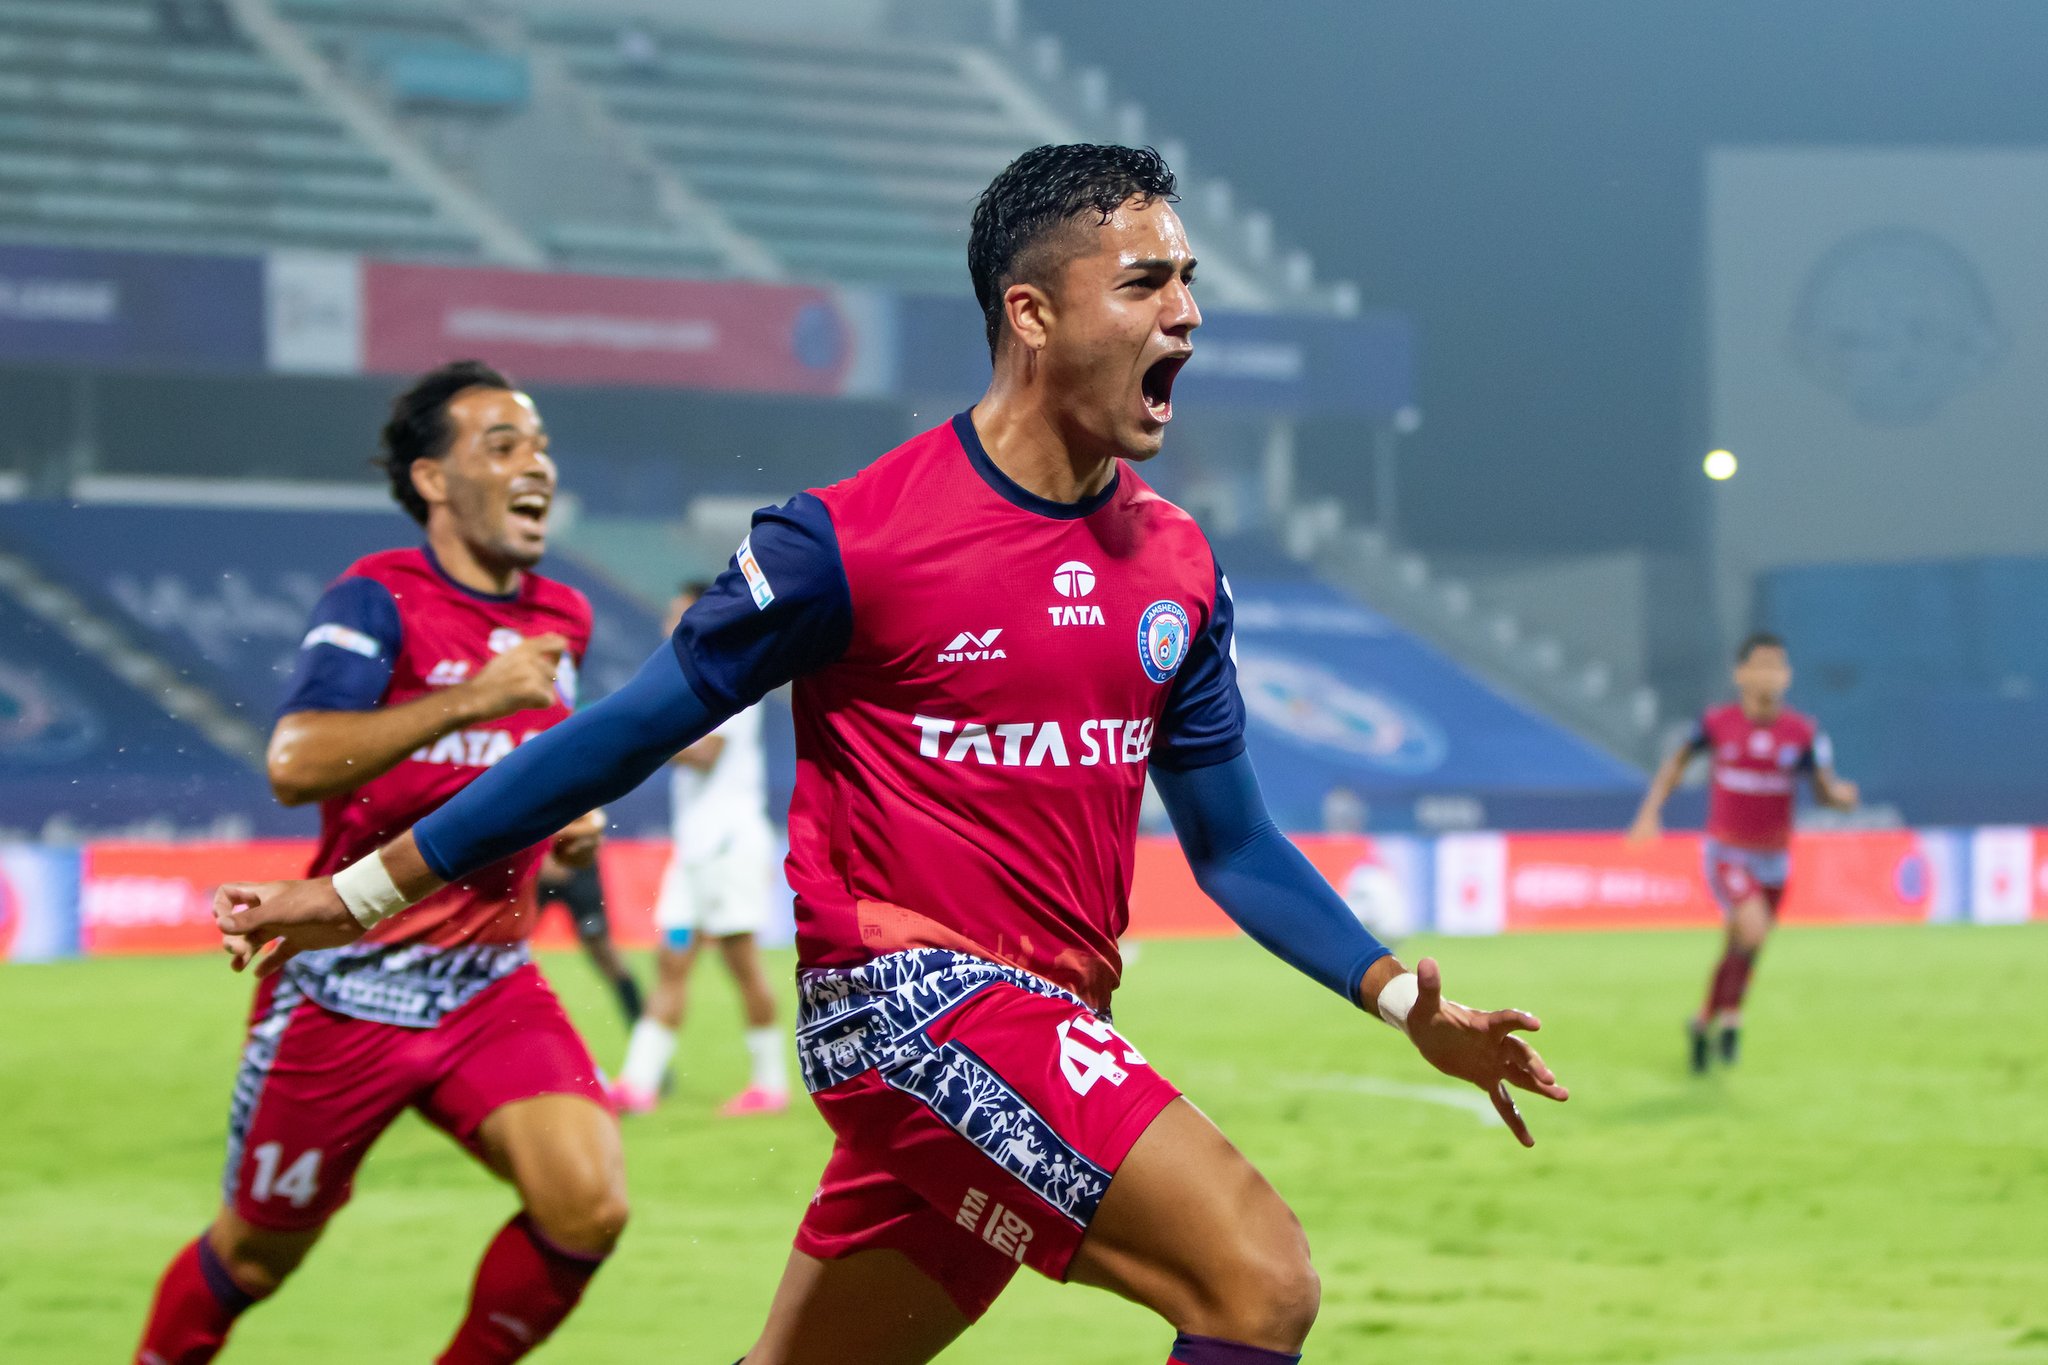 ISL 2021-22 | Jamshedpur FC move to top of the points table after narrow win over NorthEast United FC